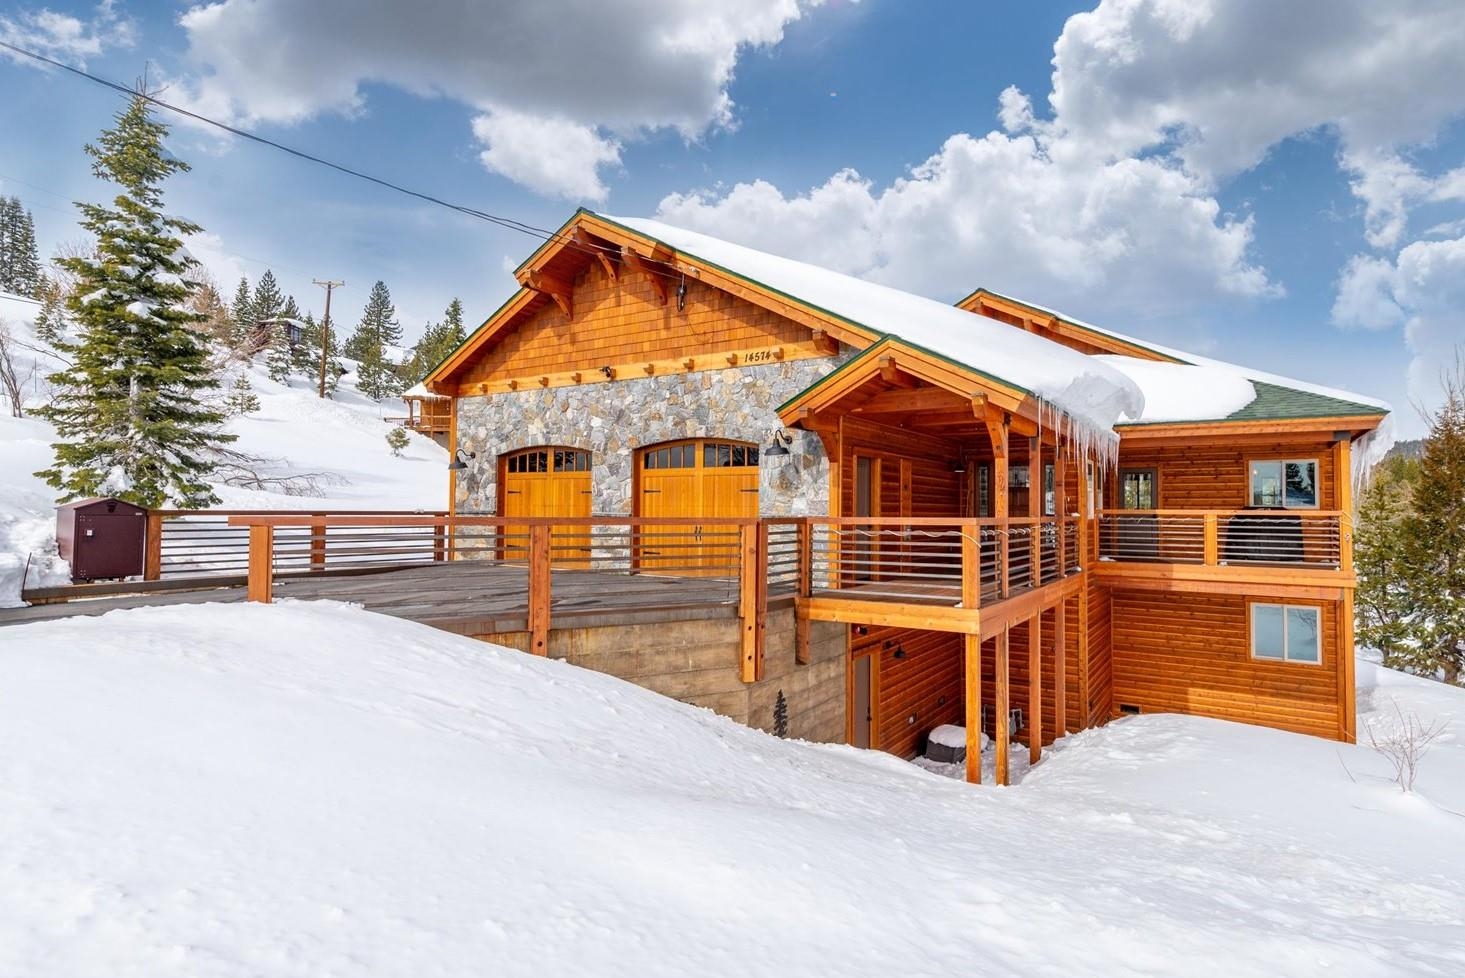 Image for 14574 Wolfgang Road, Truckee, CA 96161